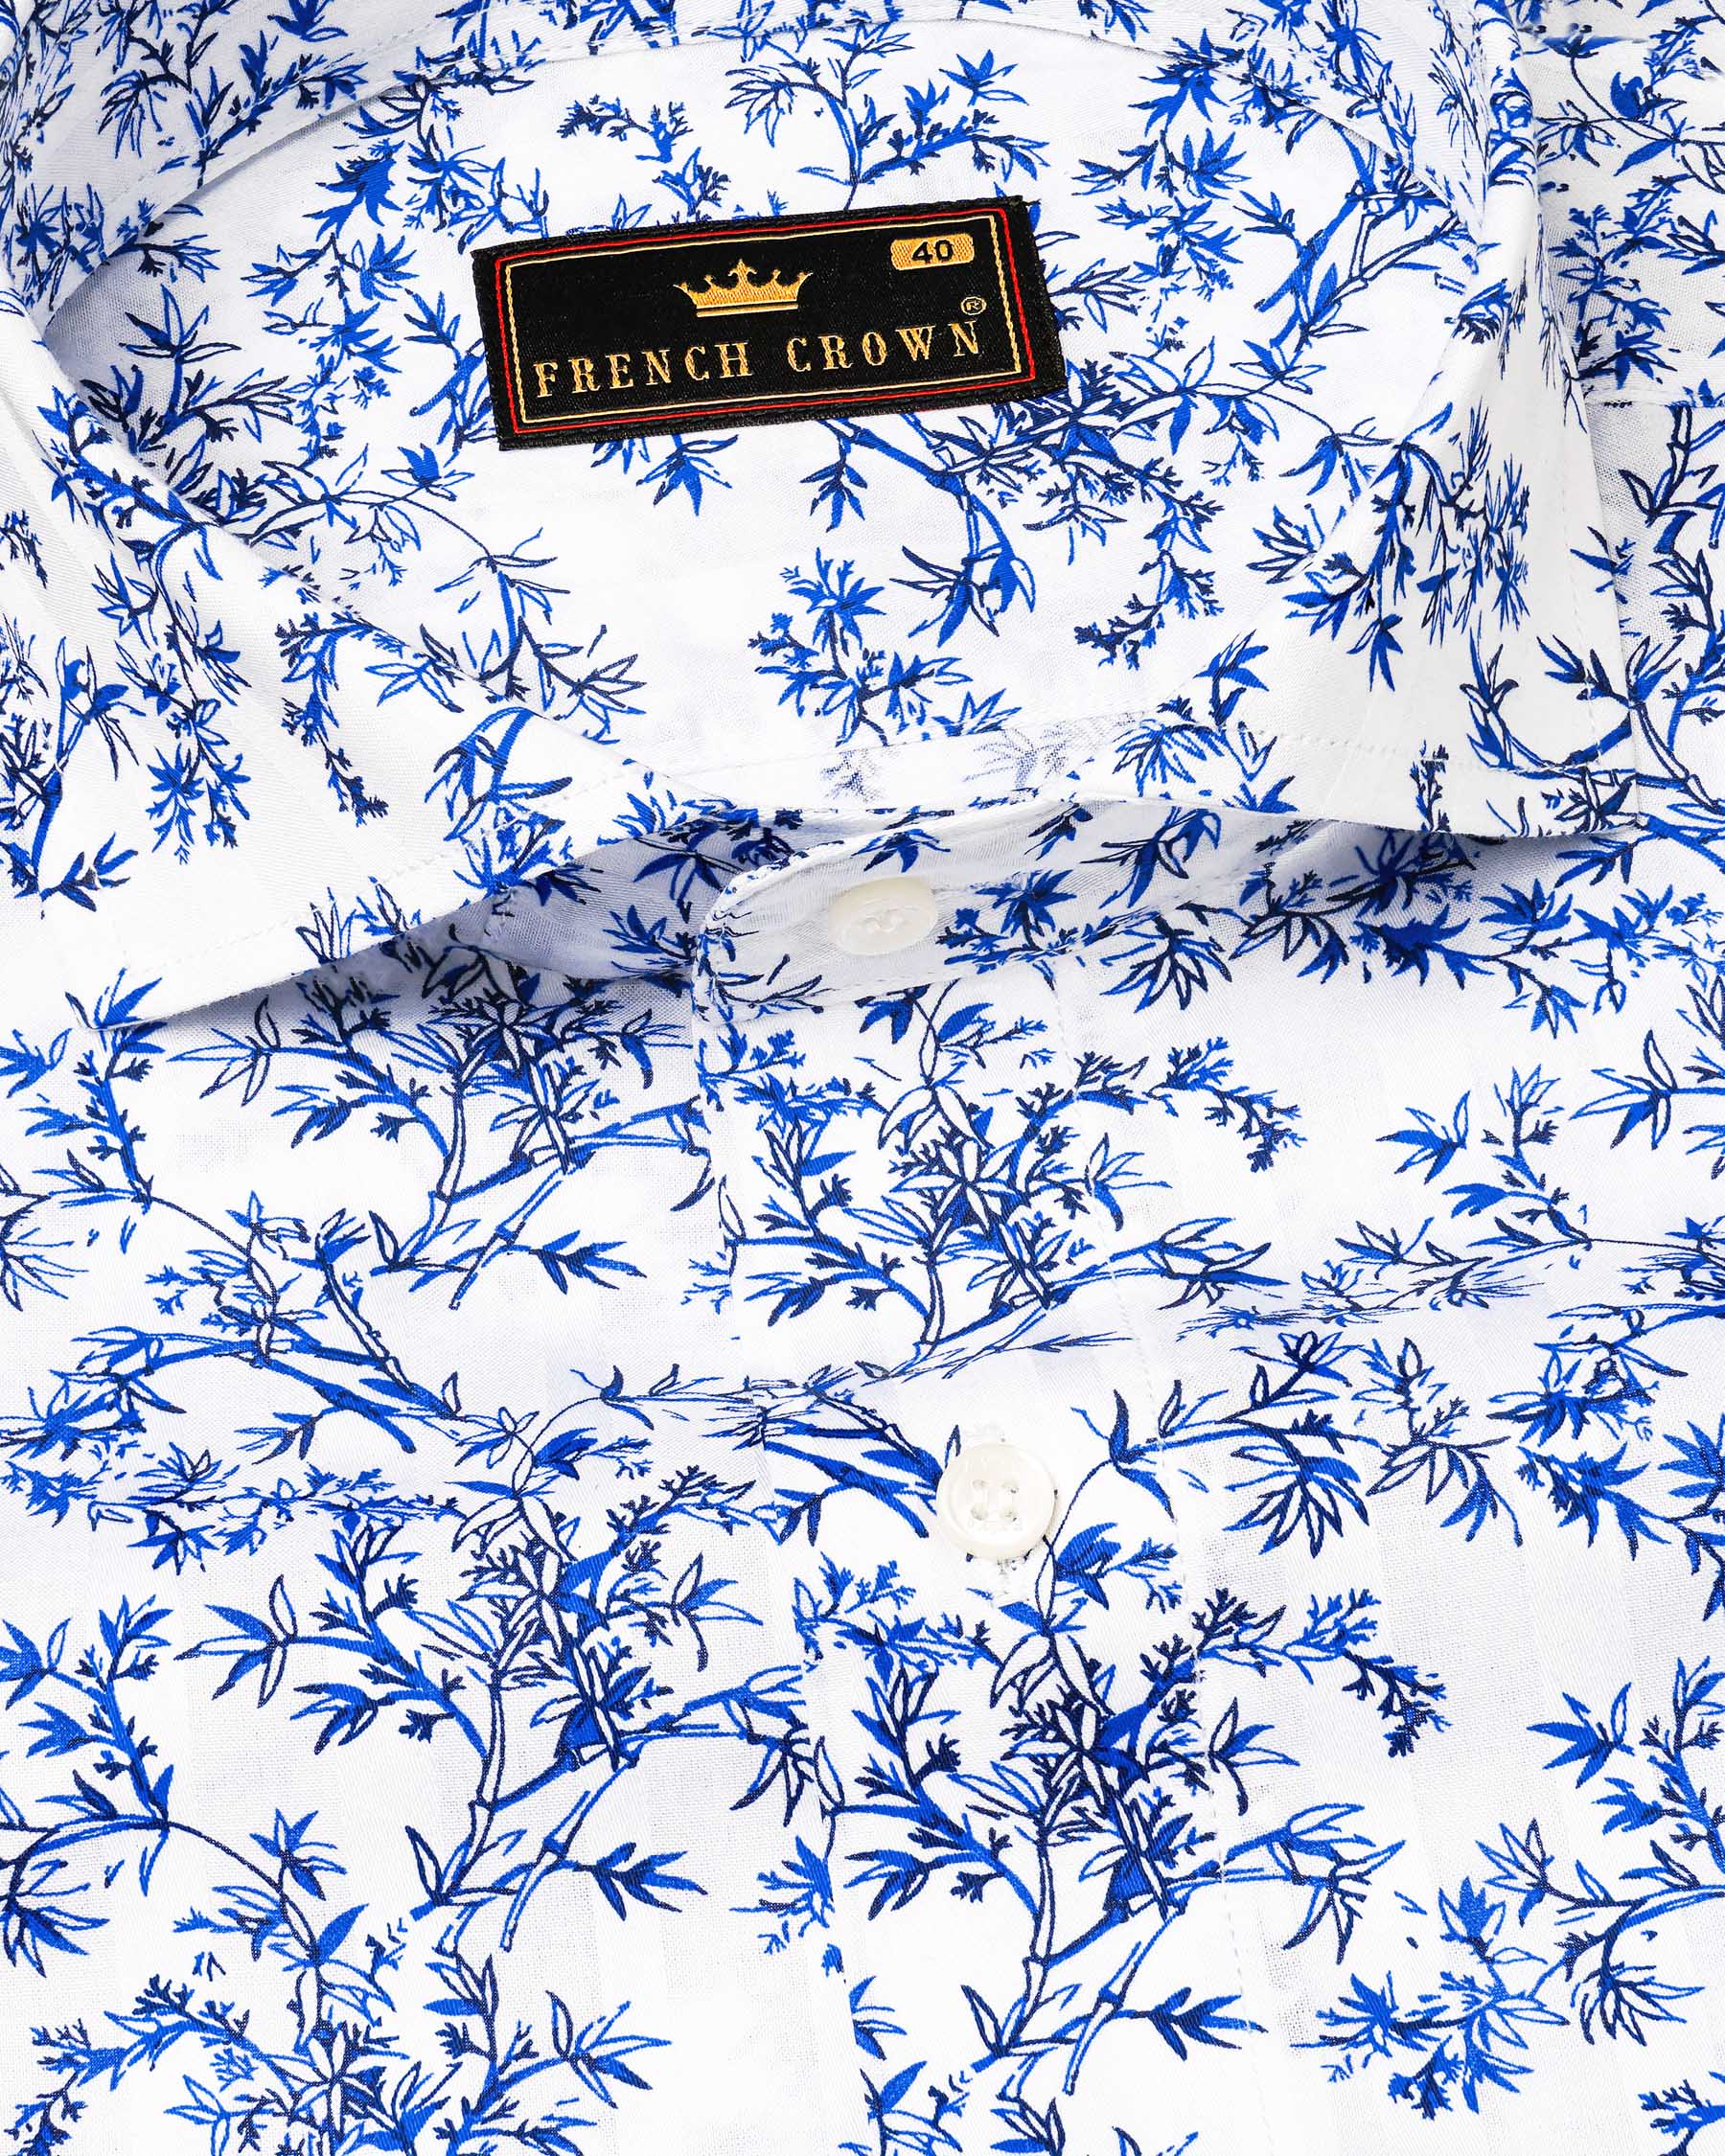 Bright White with Mariner Blue Disty Floral Dobby Textured Premium Giza Cotton Shirt 7878-CA-38, 7878-CA-H-38, 7878-CA-39, 7878-CA-H-39, 7878-CA-40, 7878-CA-H-40, 7878-CA-42, 7878-CA-H-42, 7878-CA-44, 7878-CA-H-44, 7878-CA-46, 7878-CA-H-46, 7878-CA-48, 7878-CA-H-48, 7878-CA-50, 7878-CA-H-50, 7878-CA-52, 7878-CA-H-52